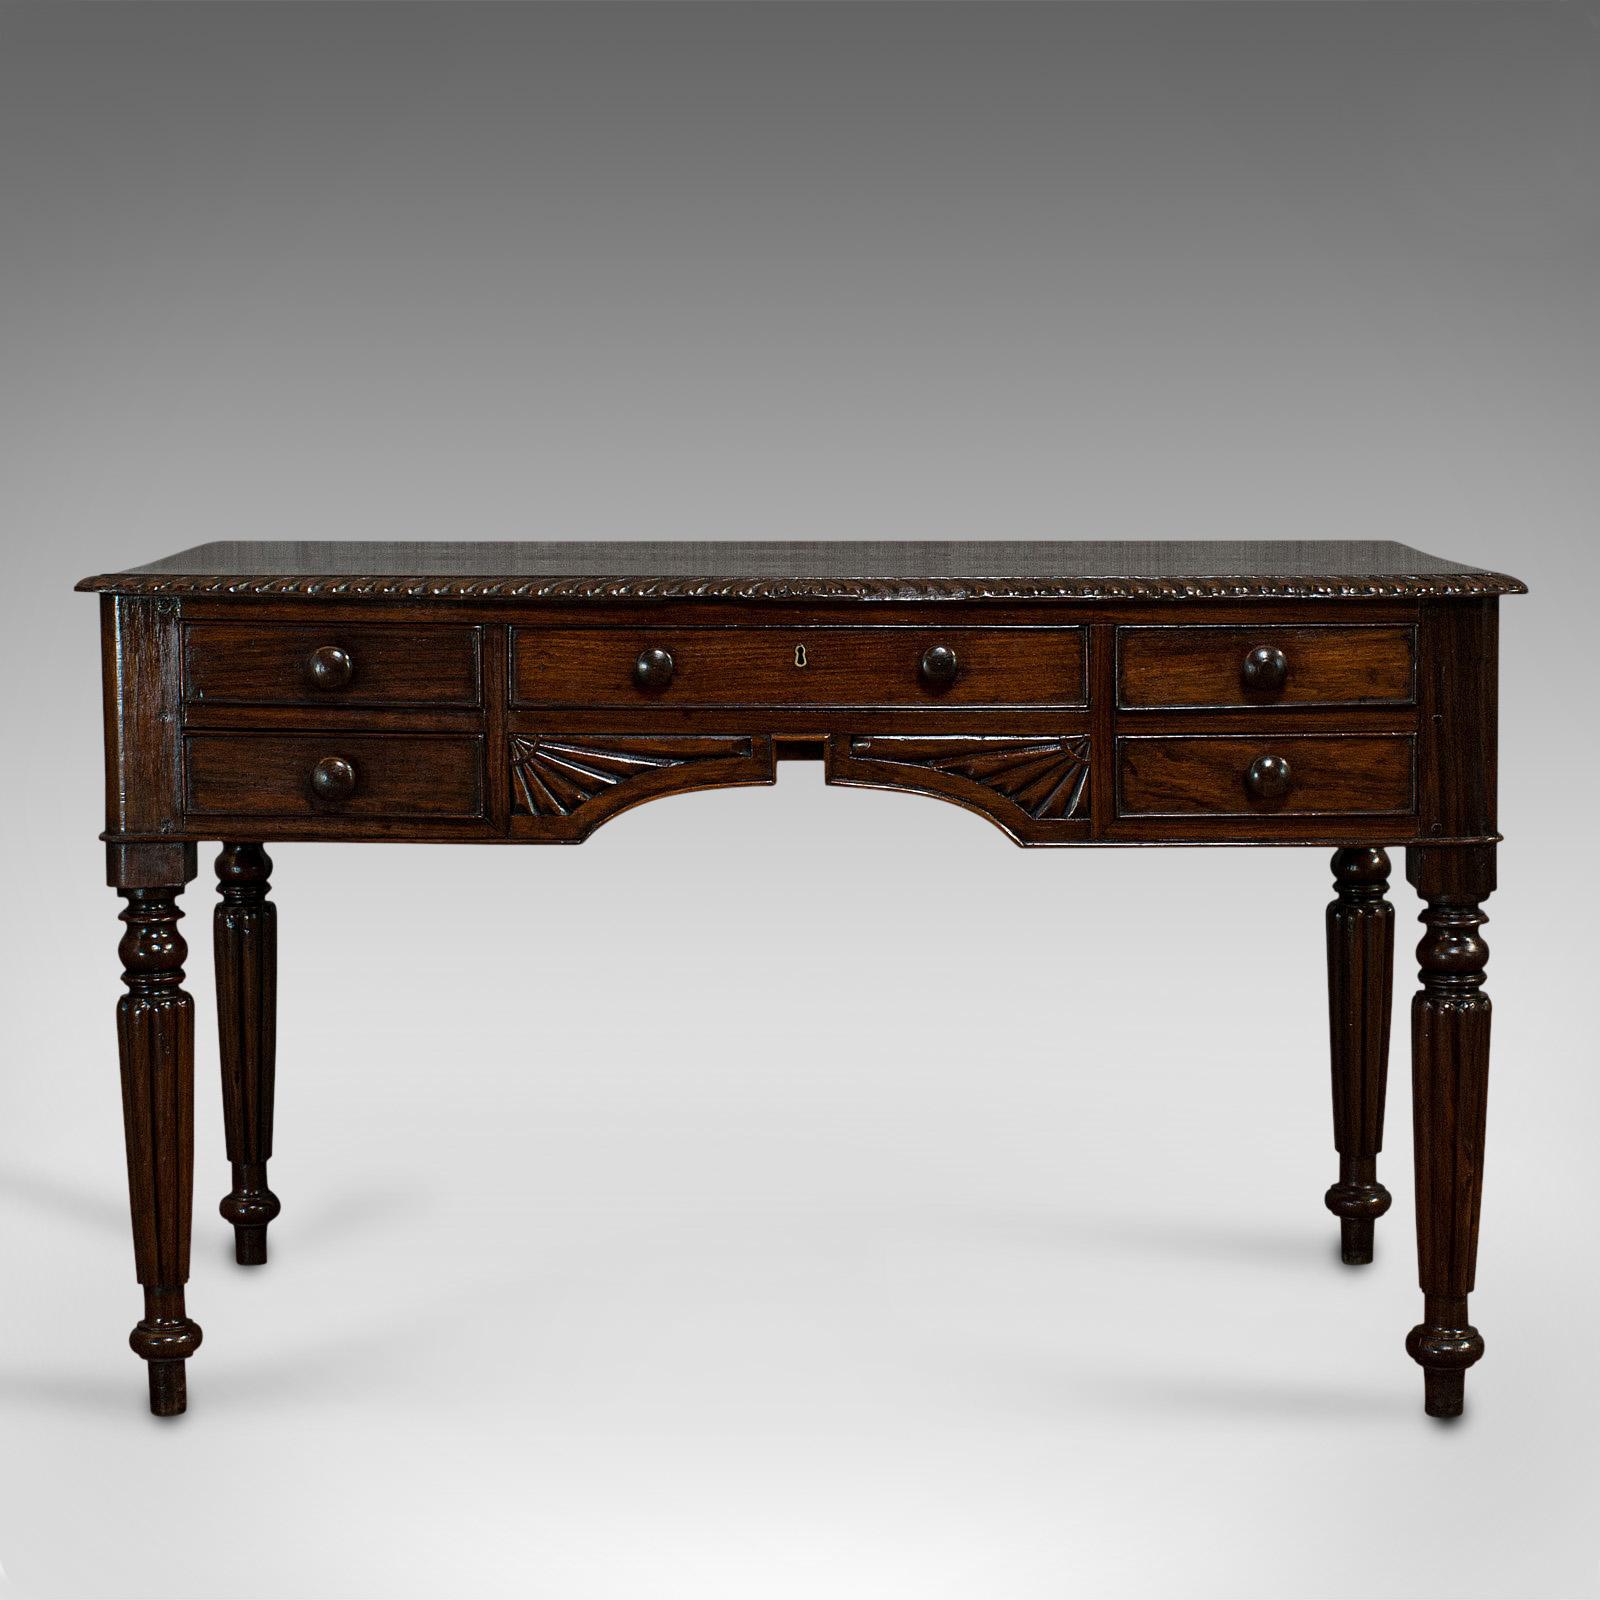 This is an antique writing desk. An English, solid rosewood five-drawer study or side table, dating to the Regency period, circa 1820.

Beautiful writing desk with wonderful carved detail
Displays a desirable aged patina
Select rosewood shows